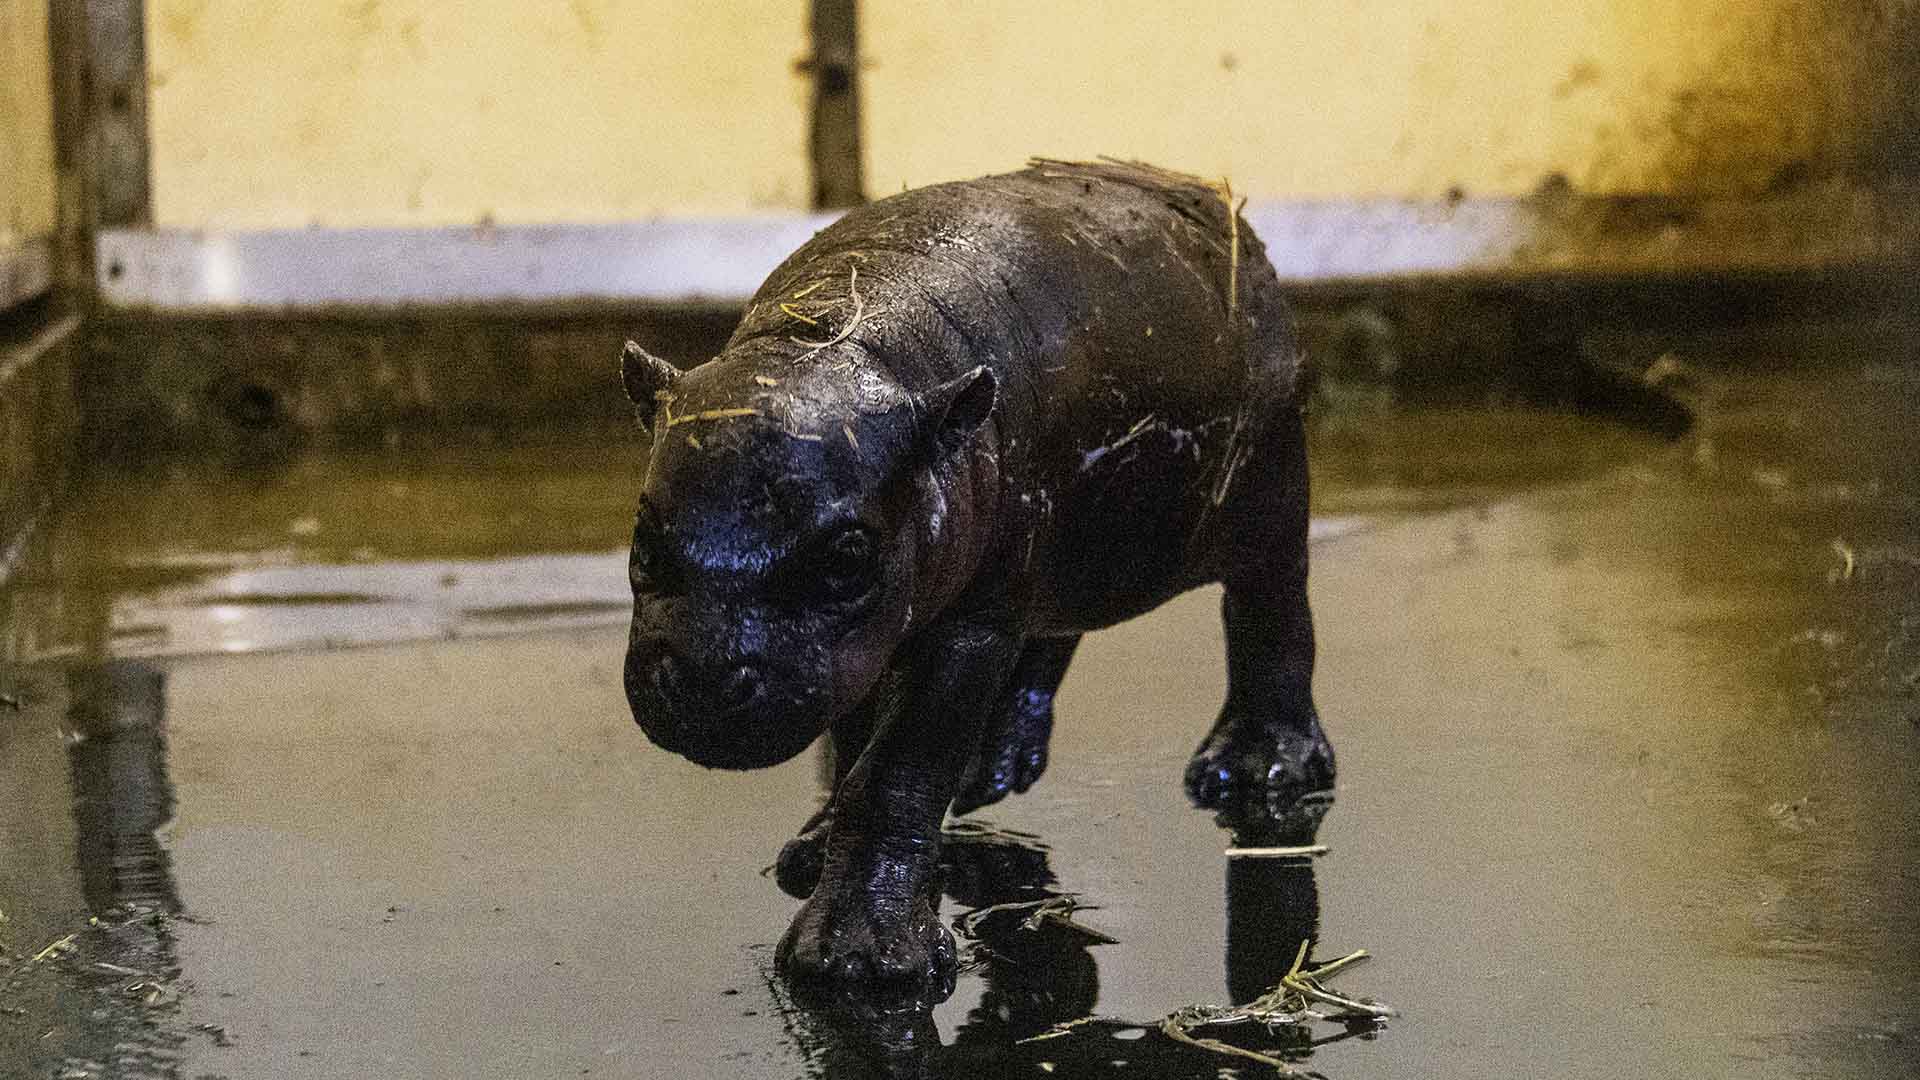 Taronga Zoo Has Released Footage of Its New Pygmy Hippo Calf to Give Your Day a Super-Cute Boost